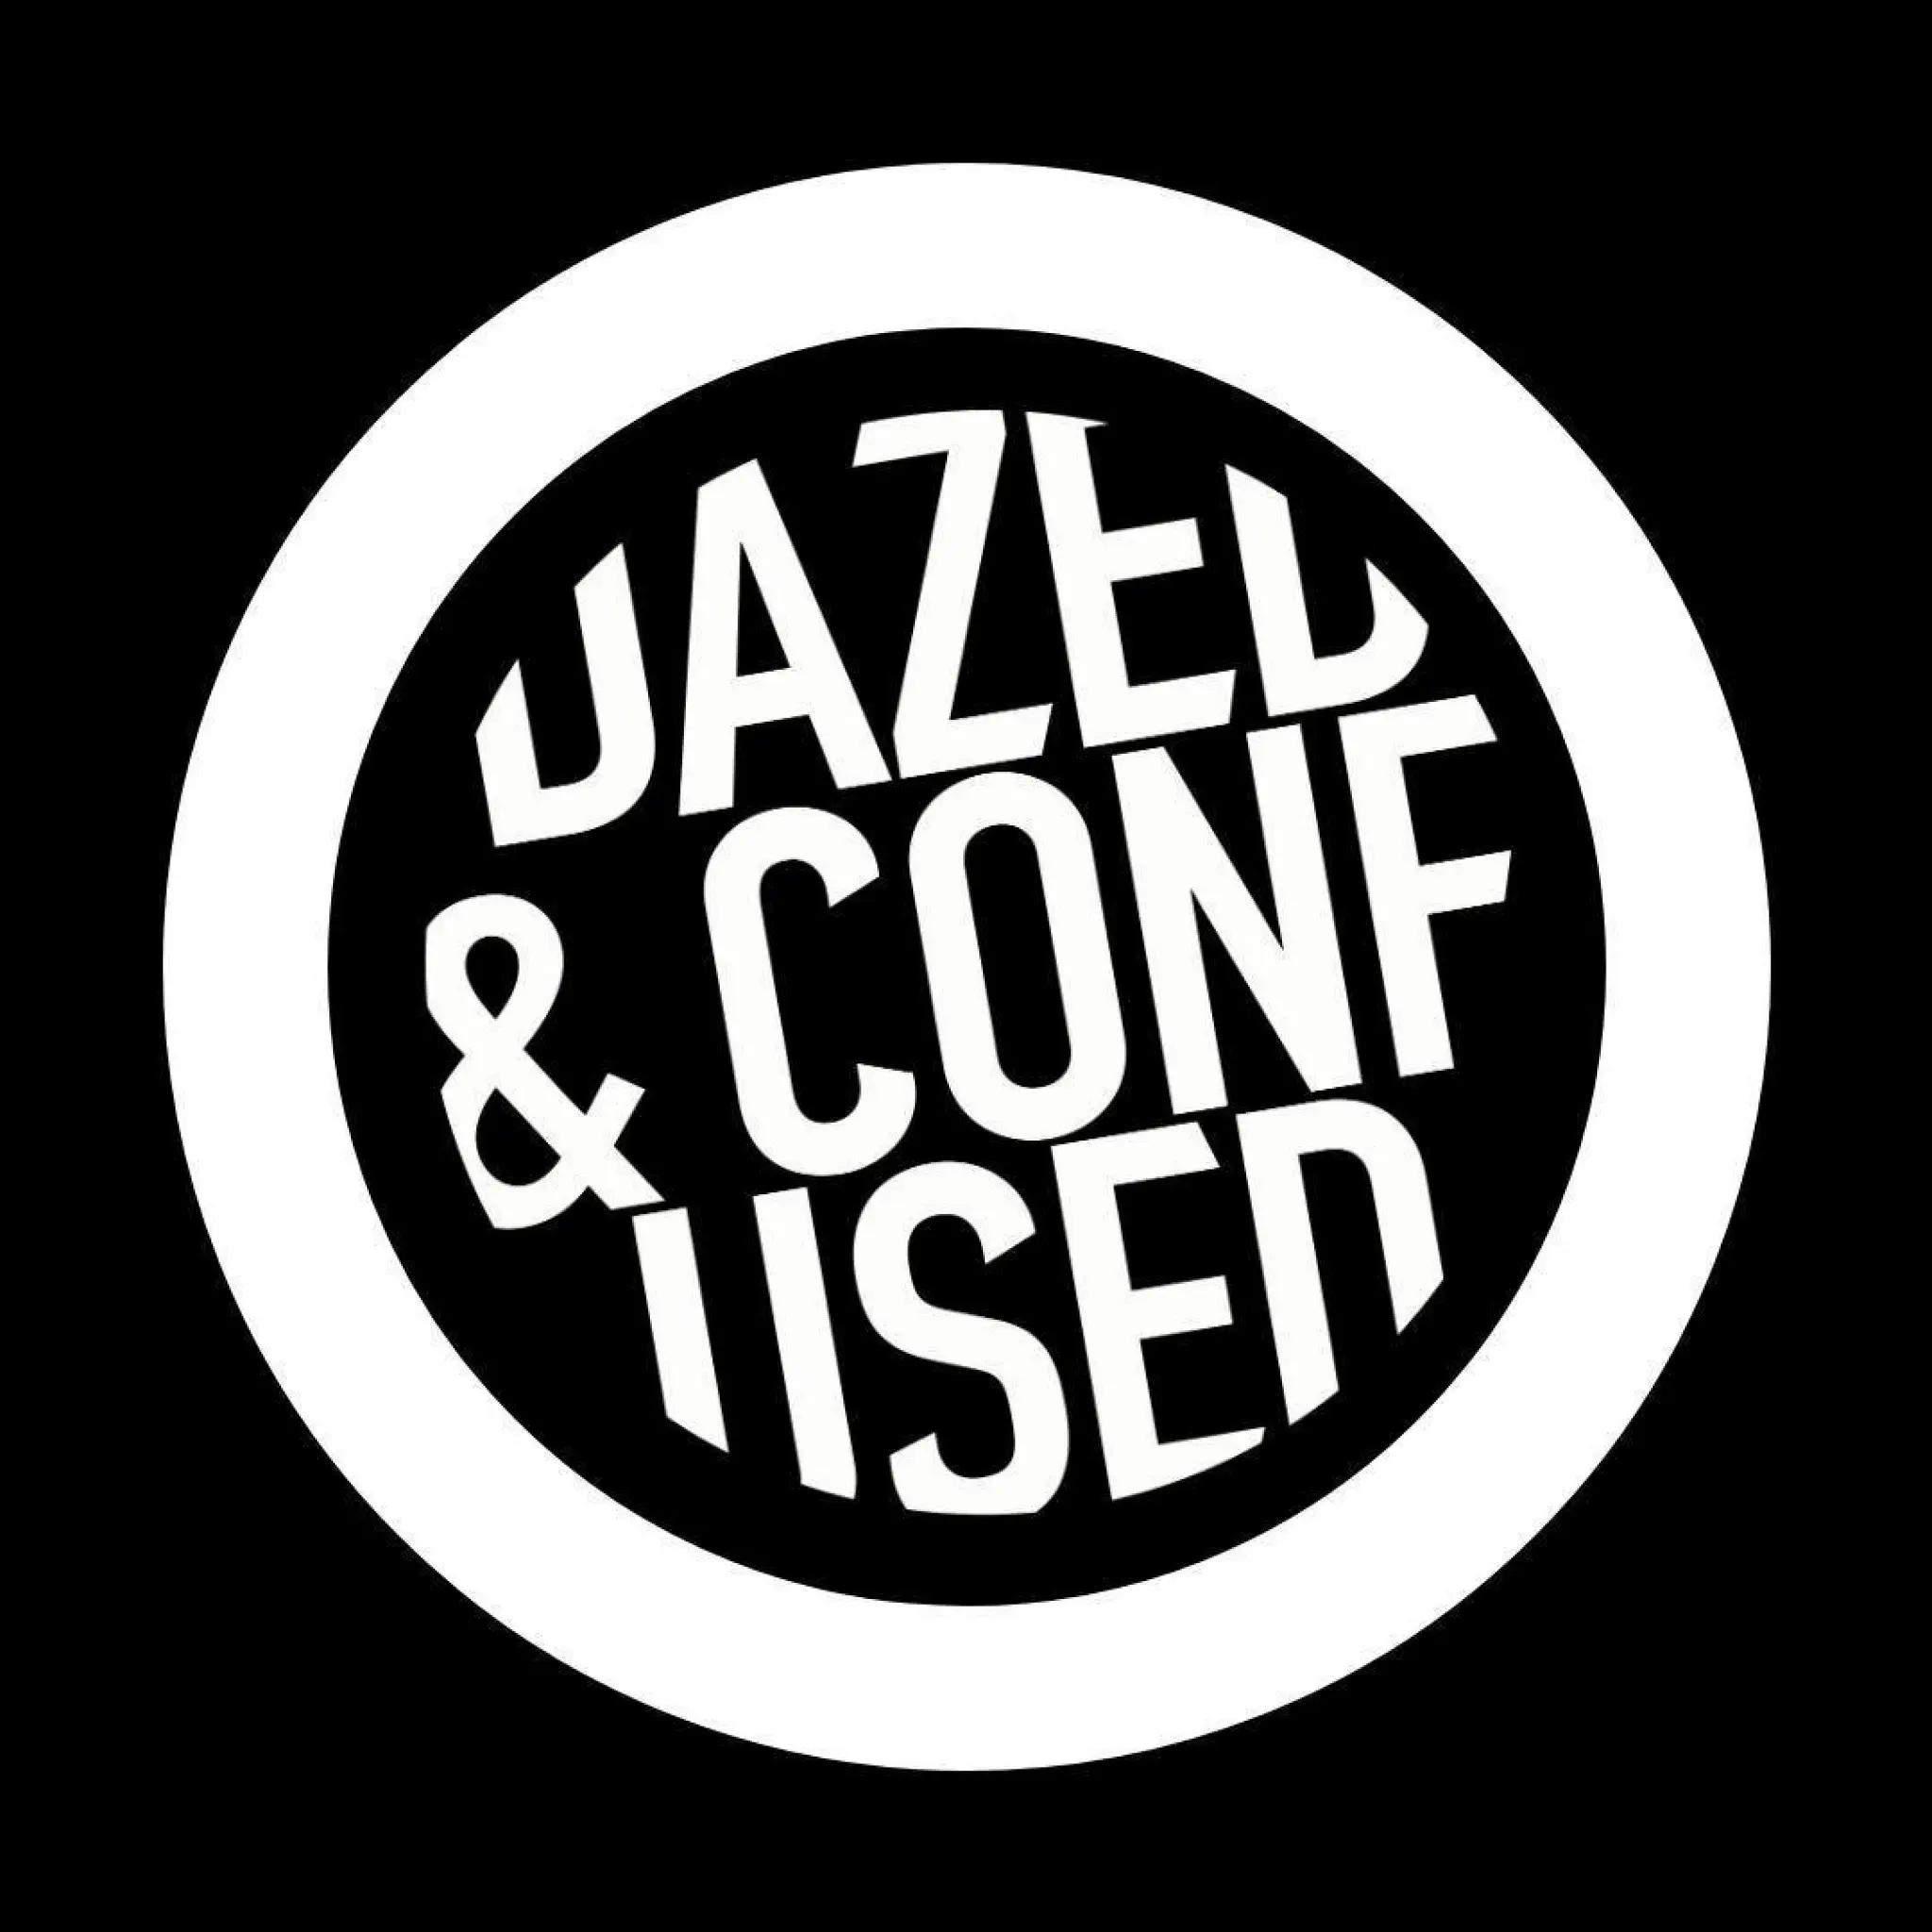 Dazed & Confused Records